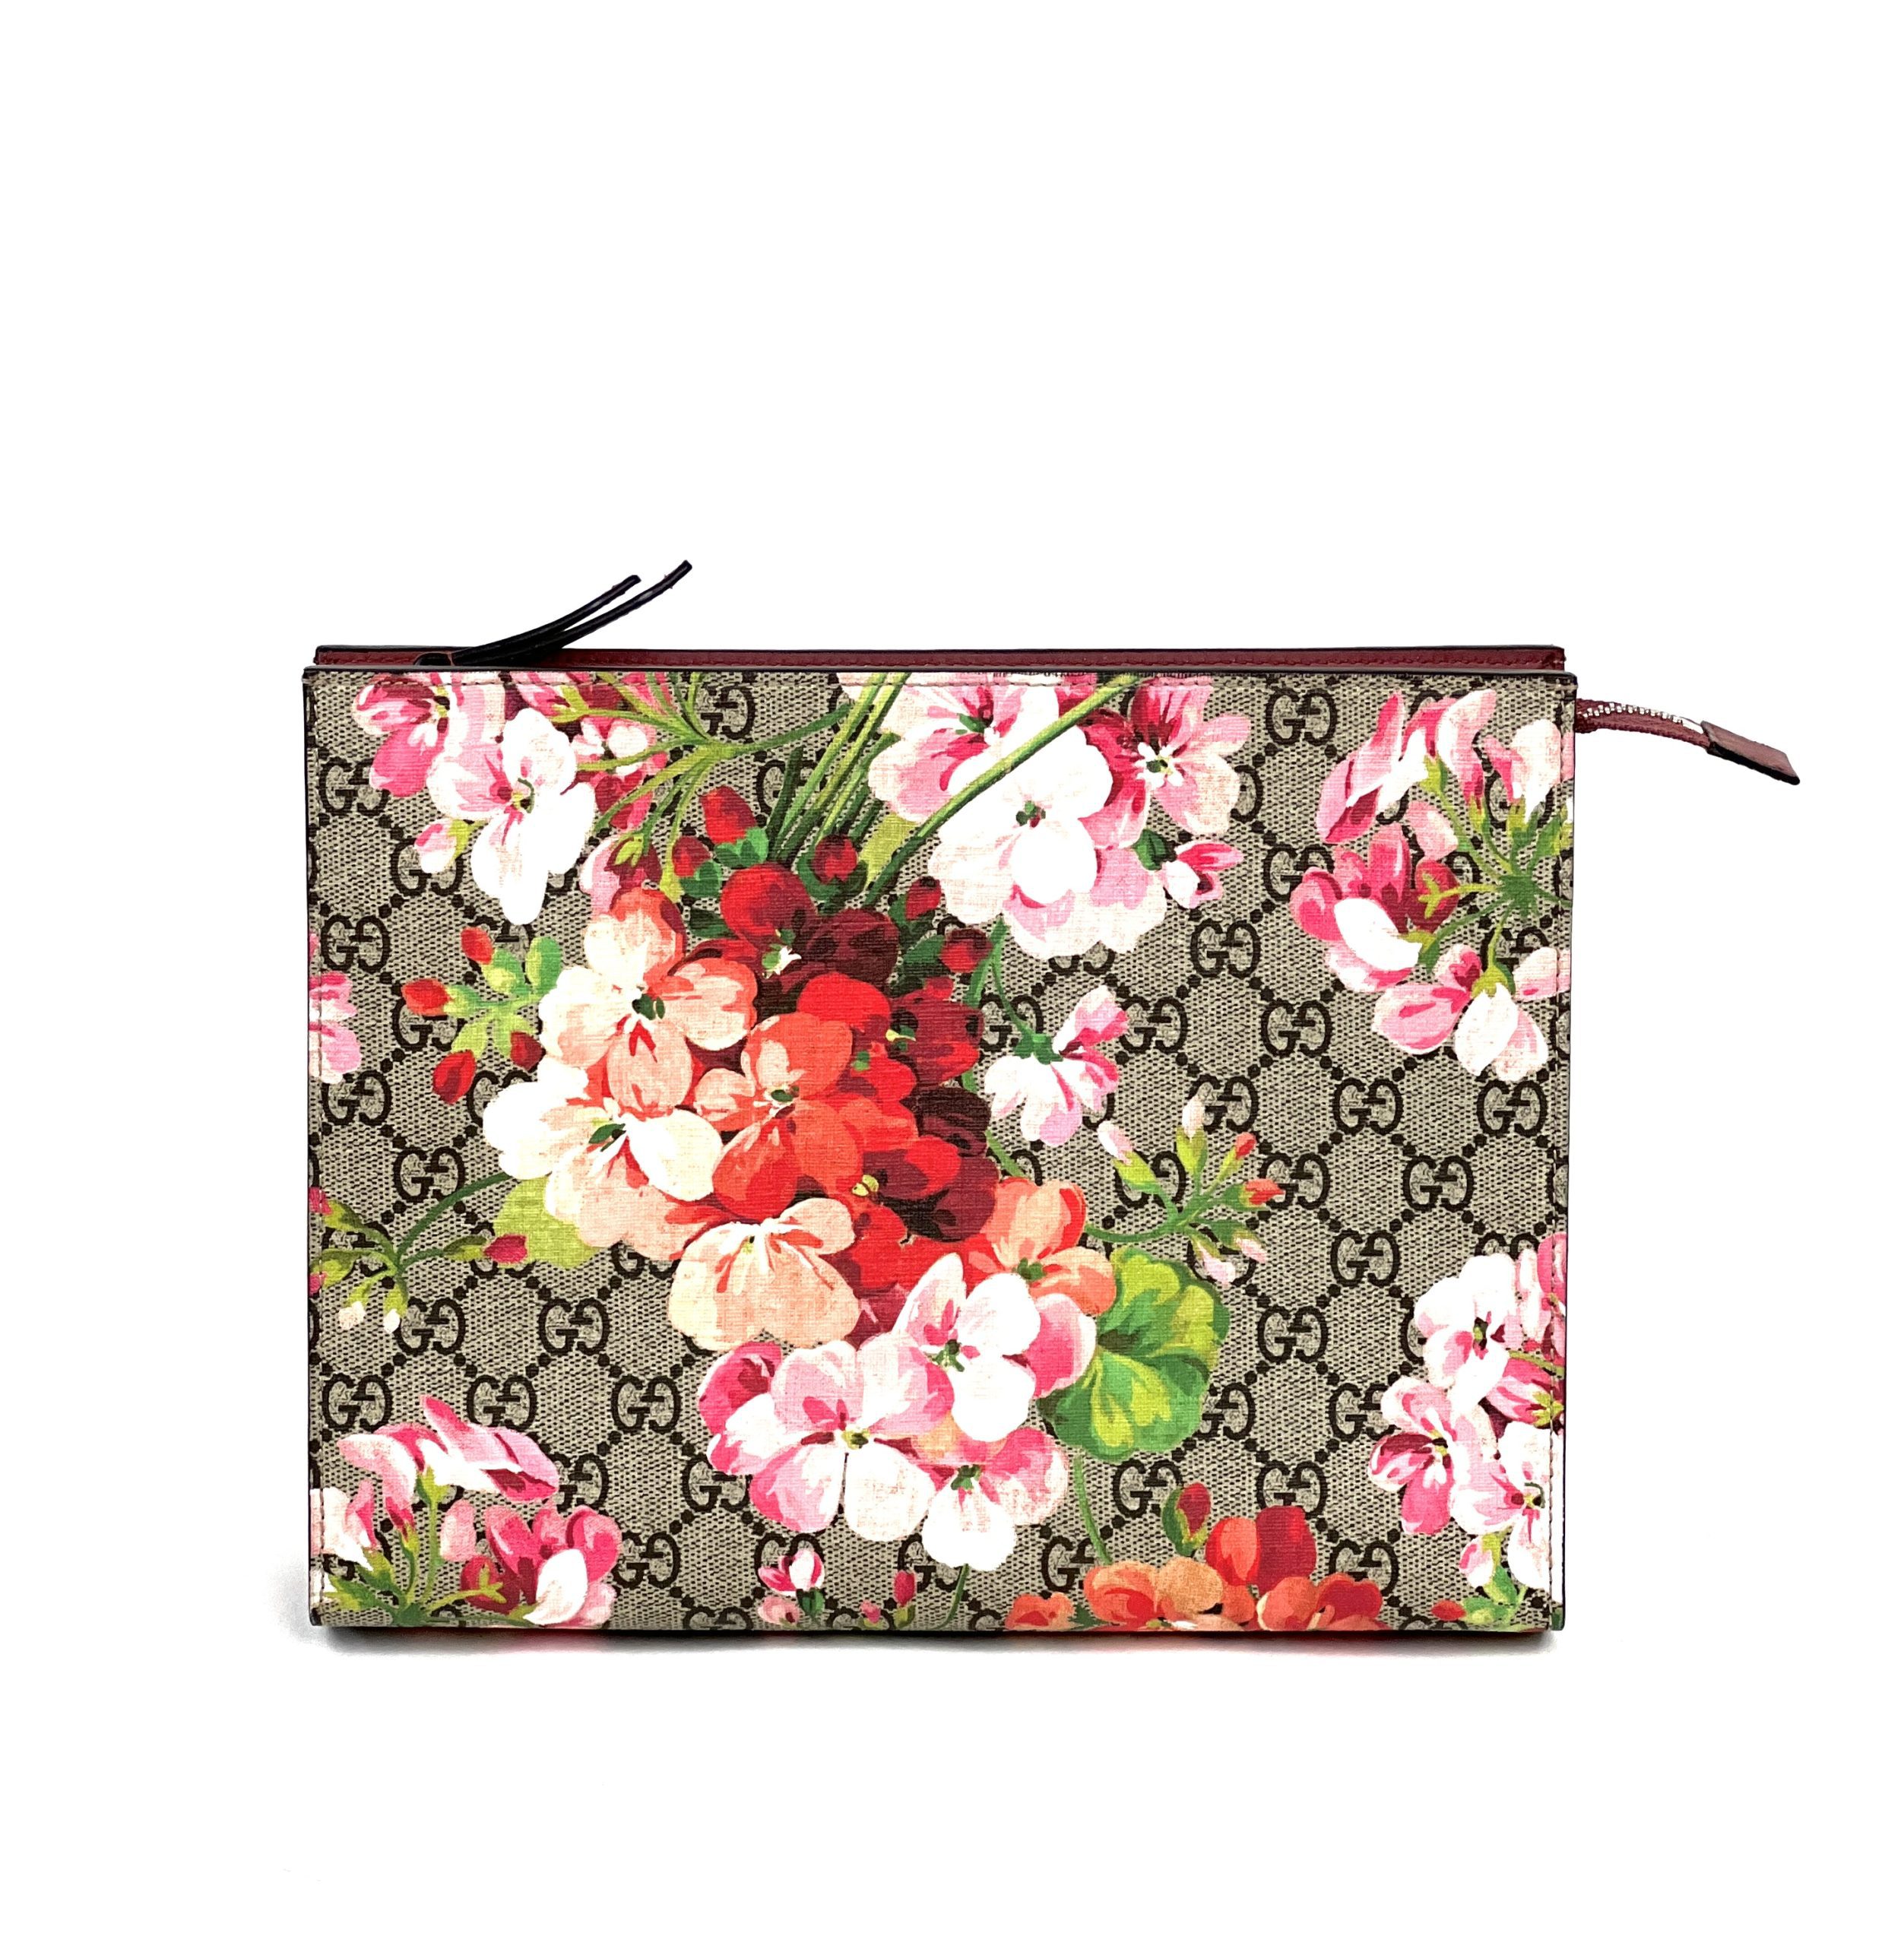 Gucci GG Blooms large cosmetic case